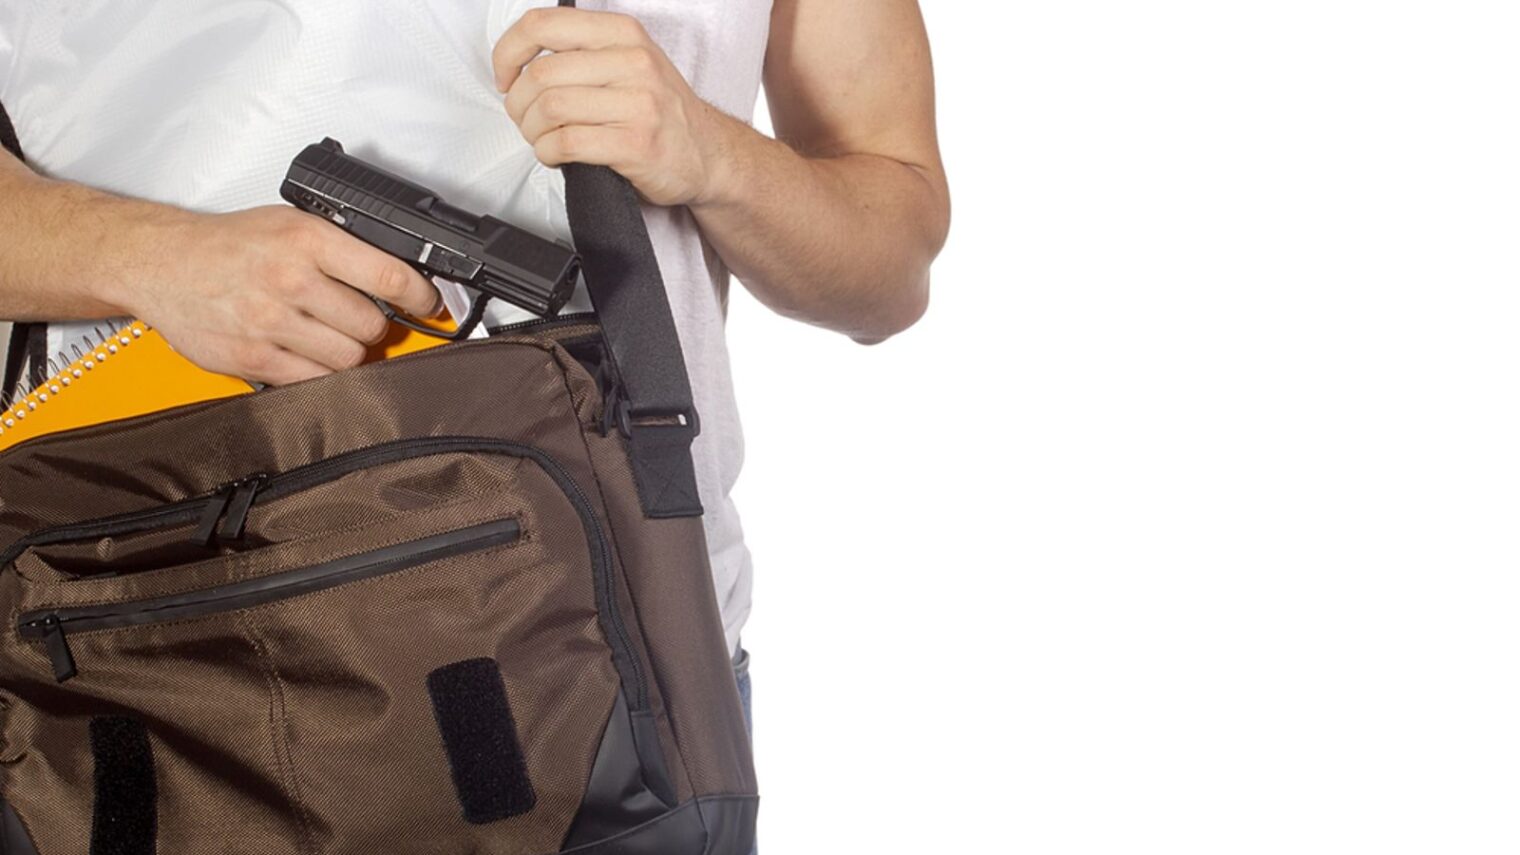 What kind of person brings a gun to school? Image via Shutterstock.com